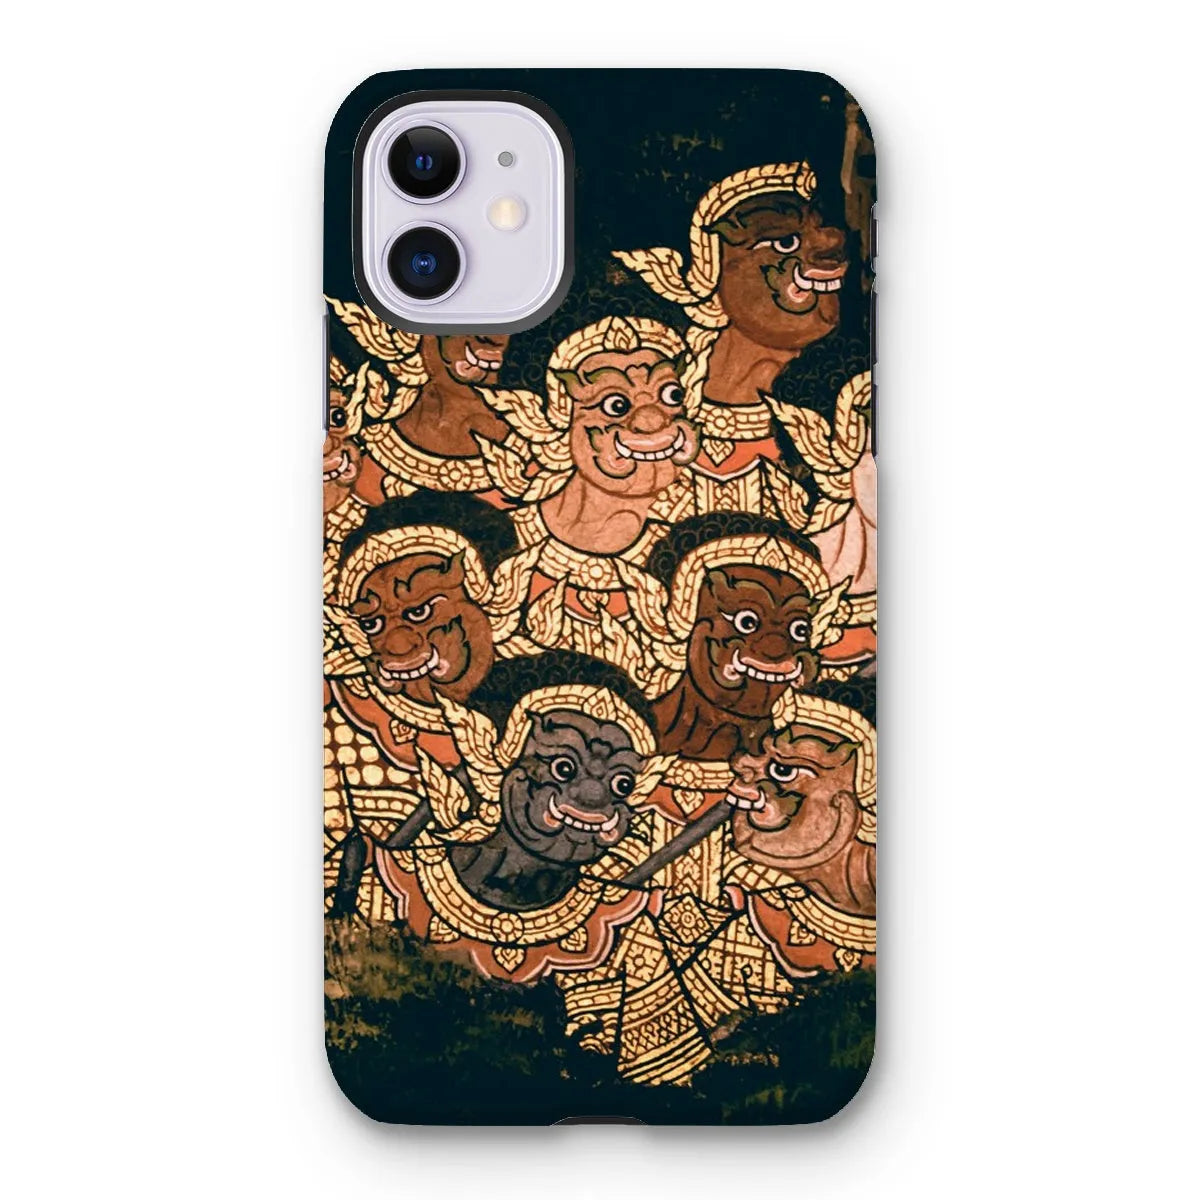 Babes In The Woods - Thailand Aesthetic Art Phone Case - Iphone 11 / Matte - Mobile Phone Cases - Aesthetic Art